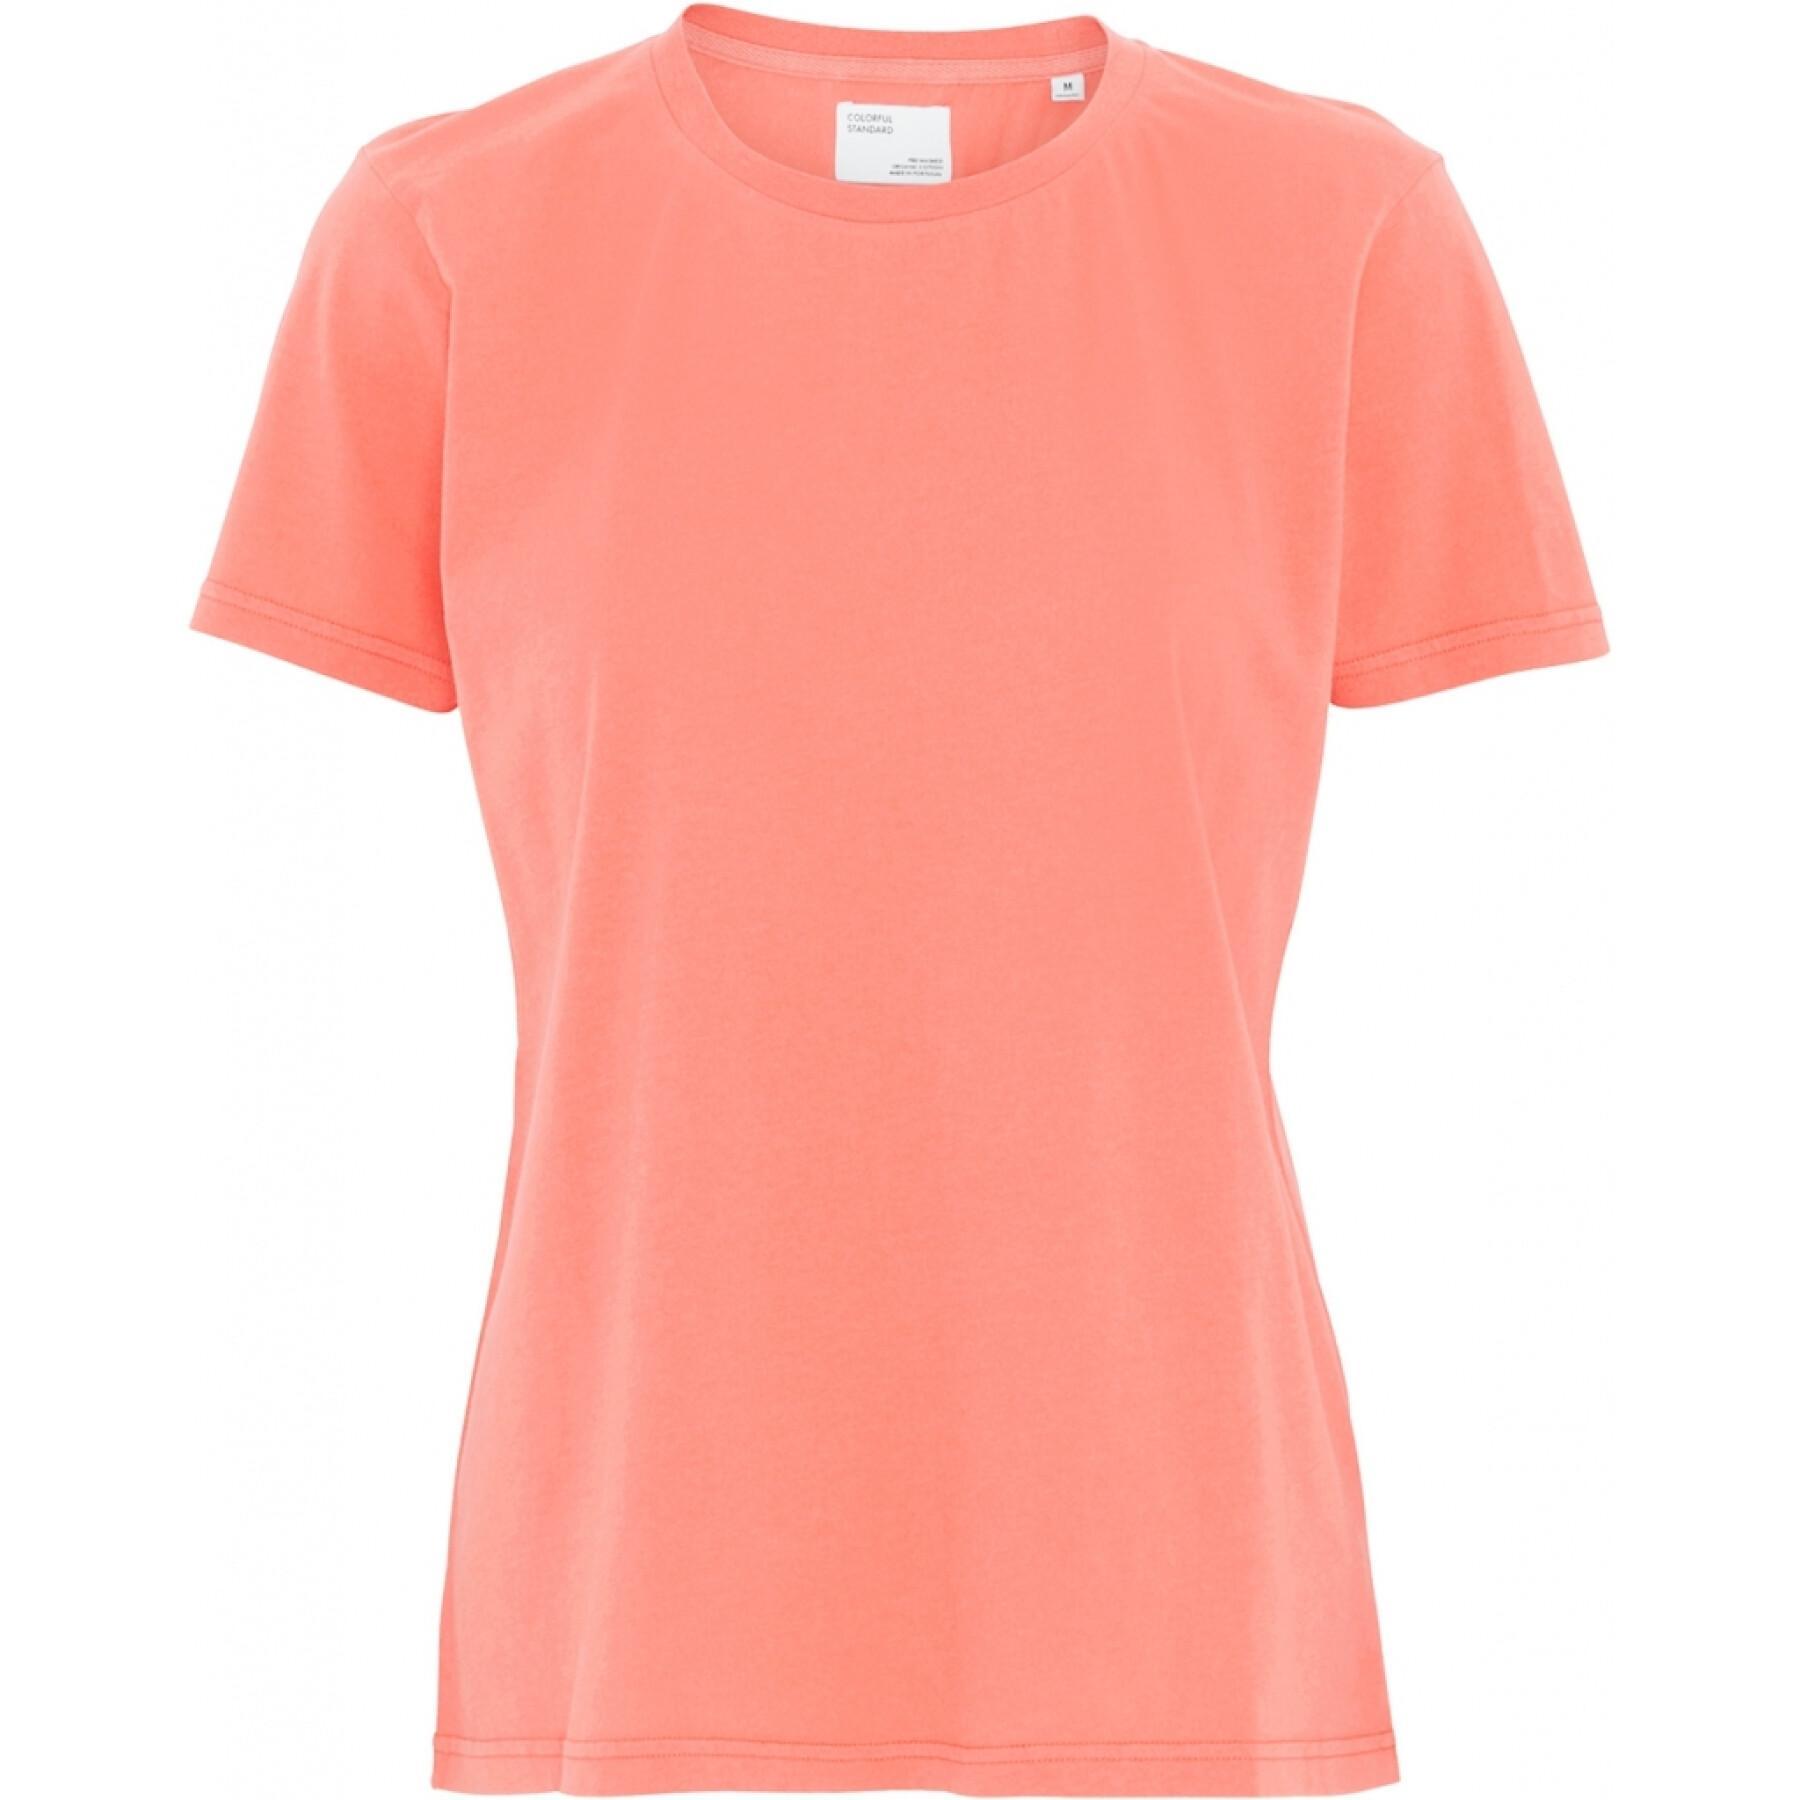 T-shirt femme Colorful Standard Light Organic bright coral